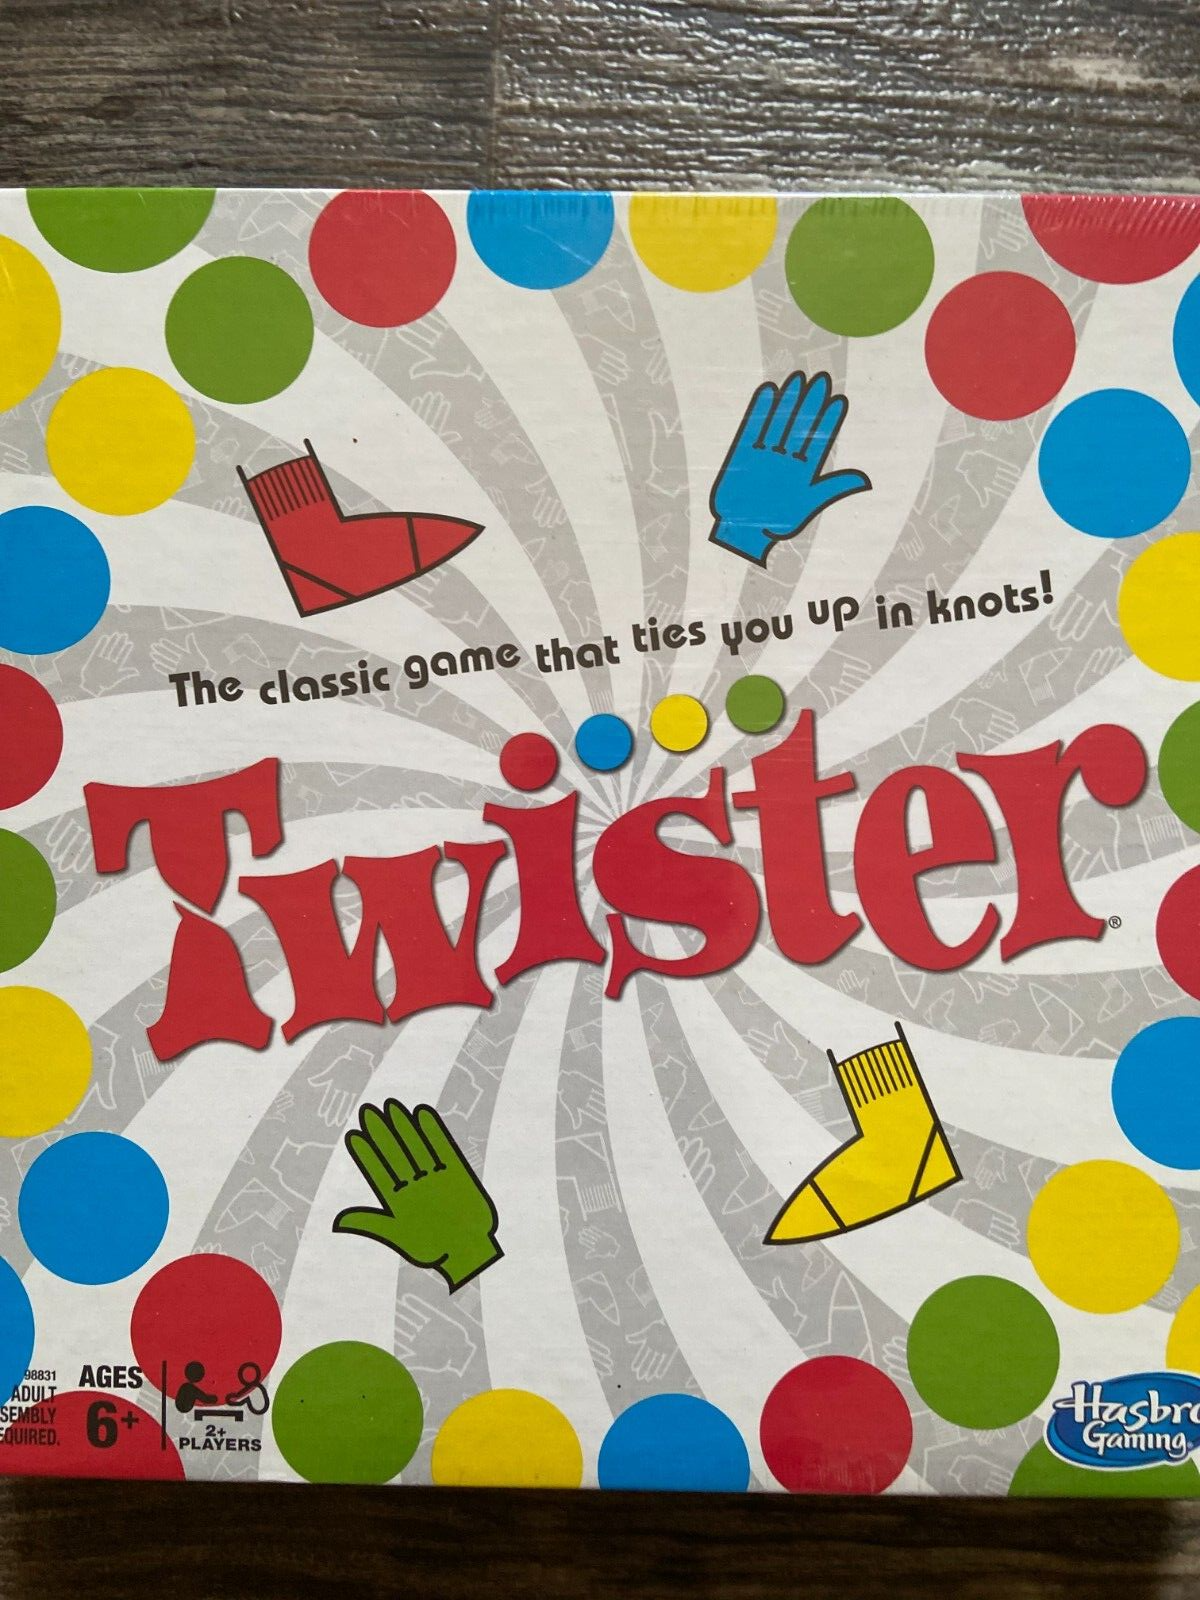 Twister Hasbro Gaming The classic game that ties you in knots! 2018 NIB - $9.90